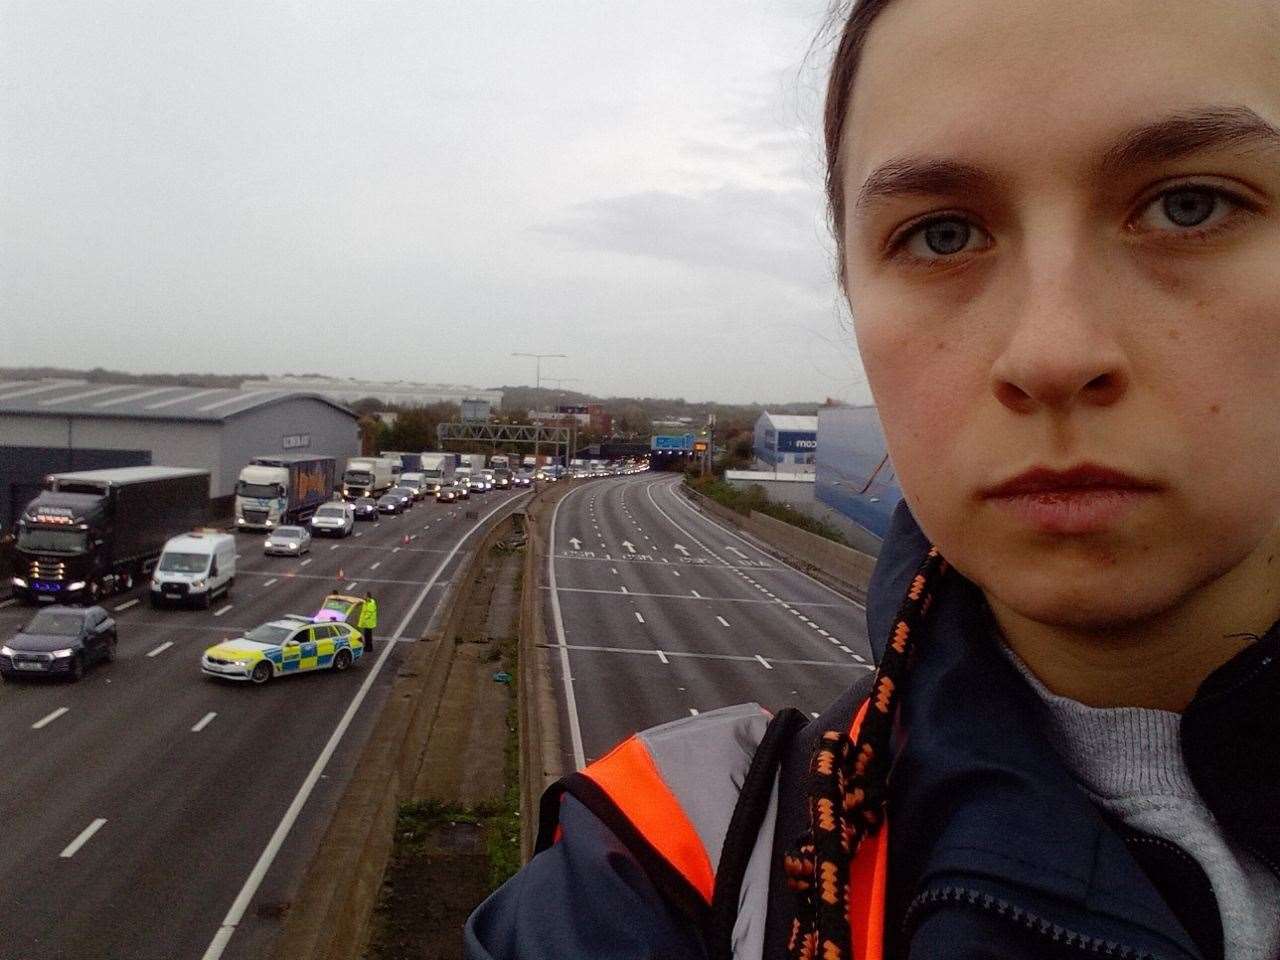 A Just Stop Oil protester on the motorway gantry